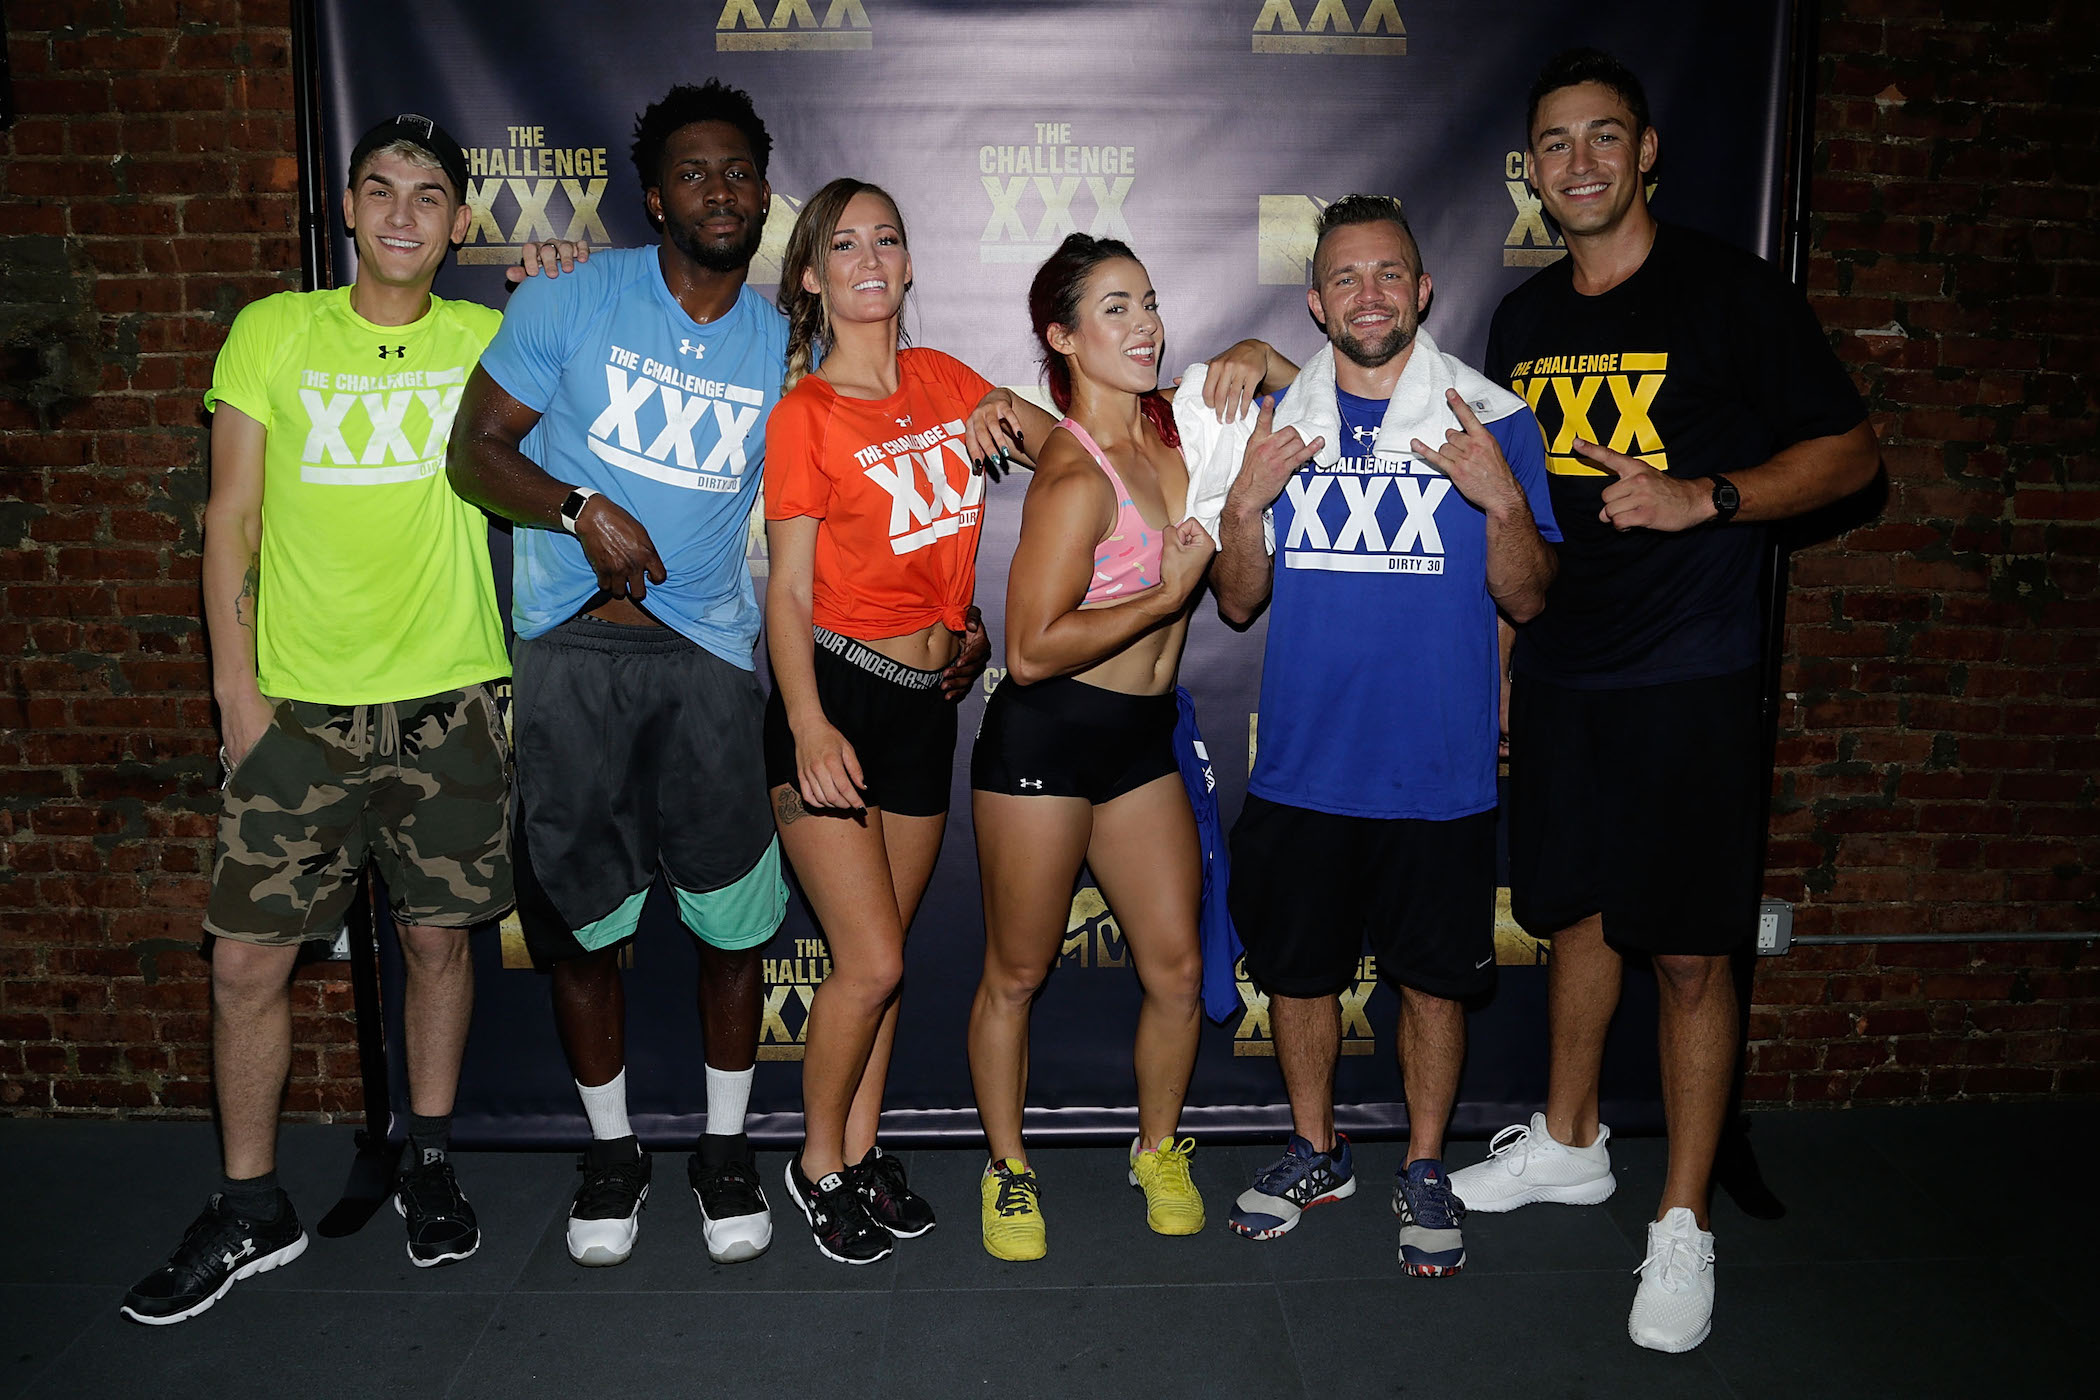 Cast members standing together from MTV's 'The Challenge' at 'The Challenge XXX': Ultimate Fan Experience 